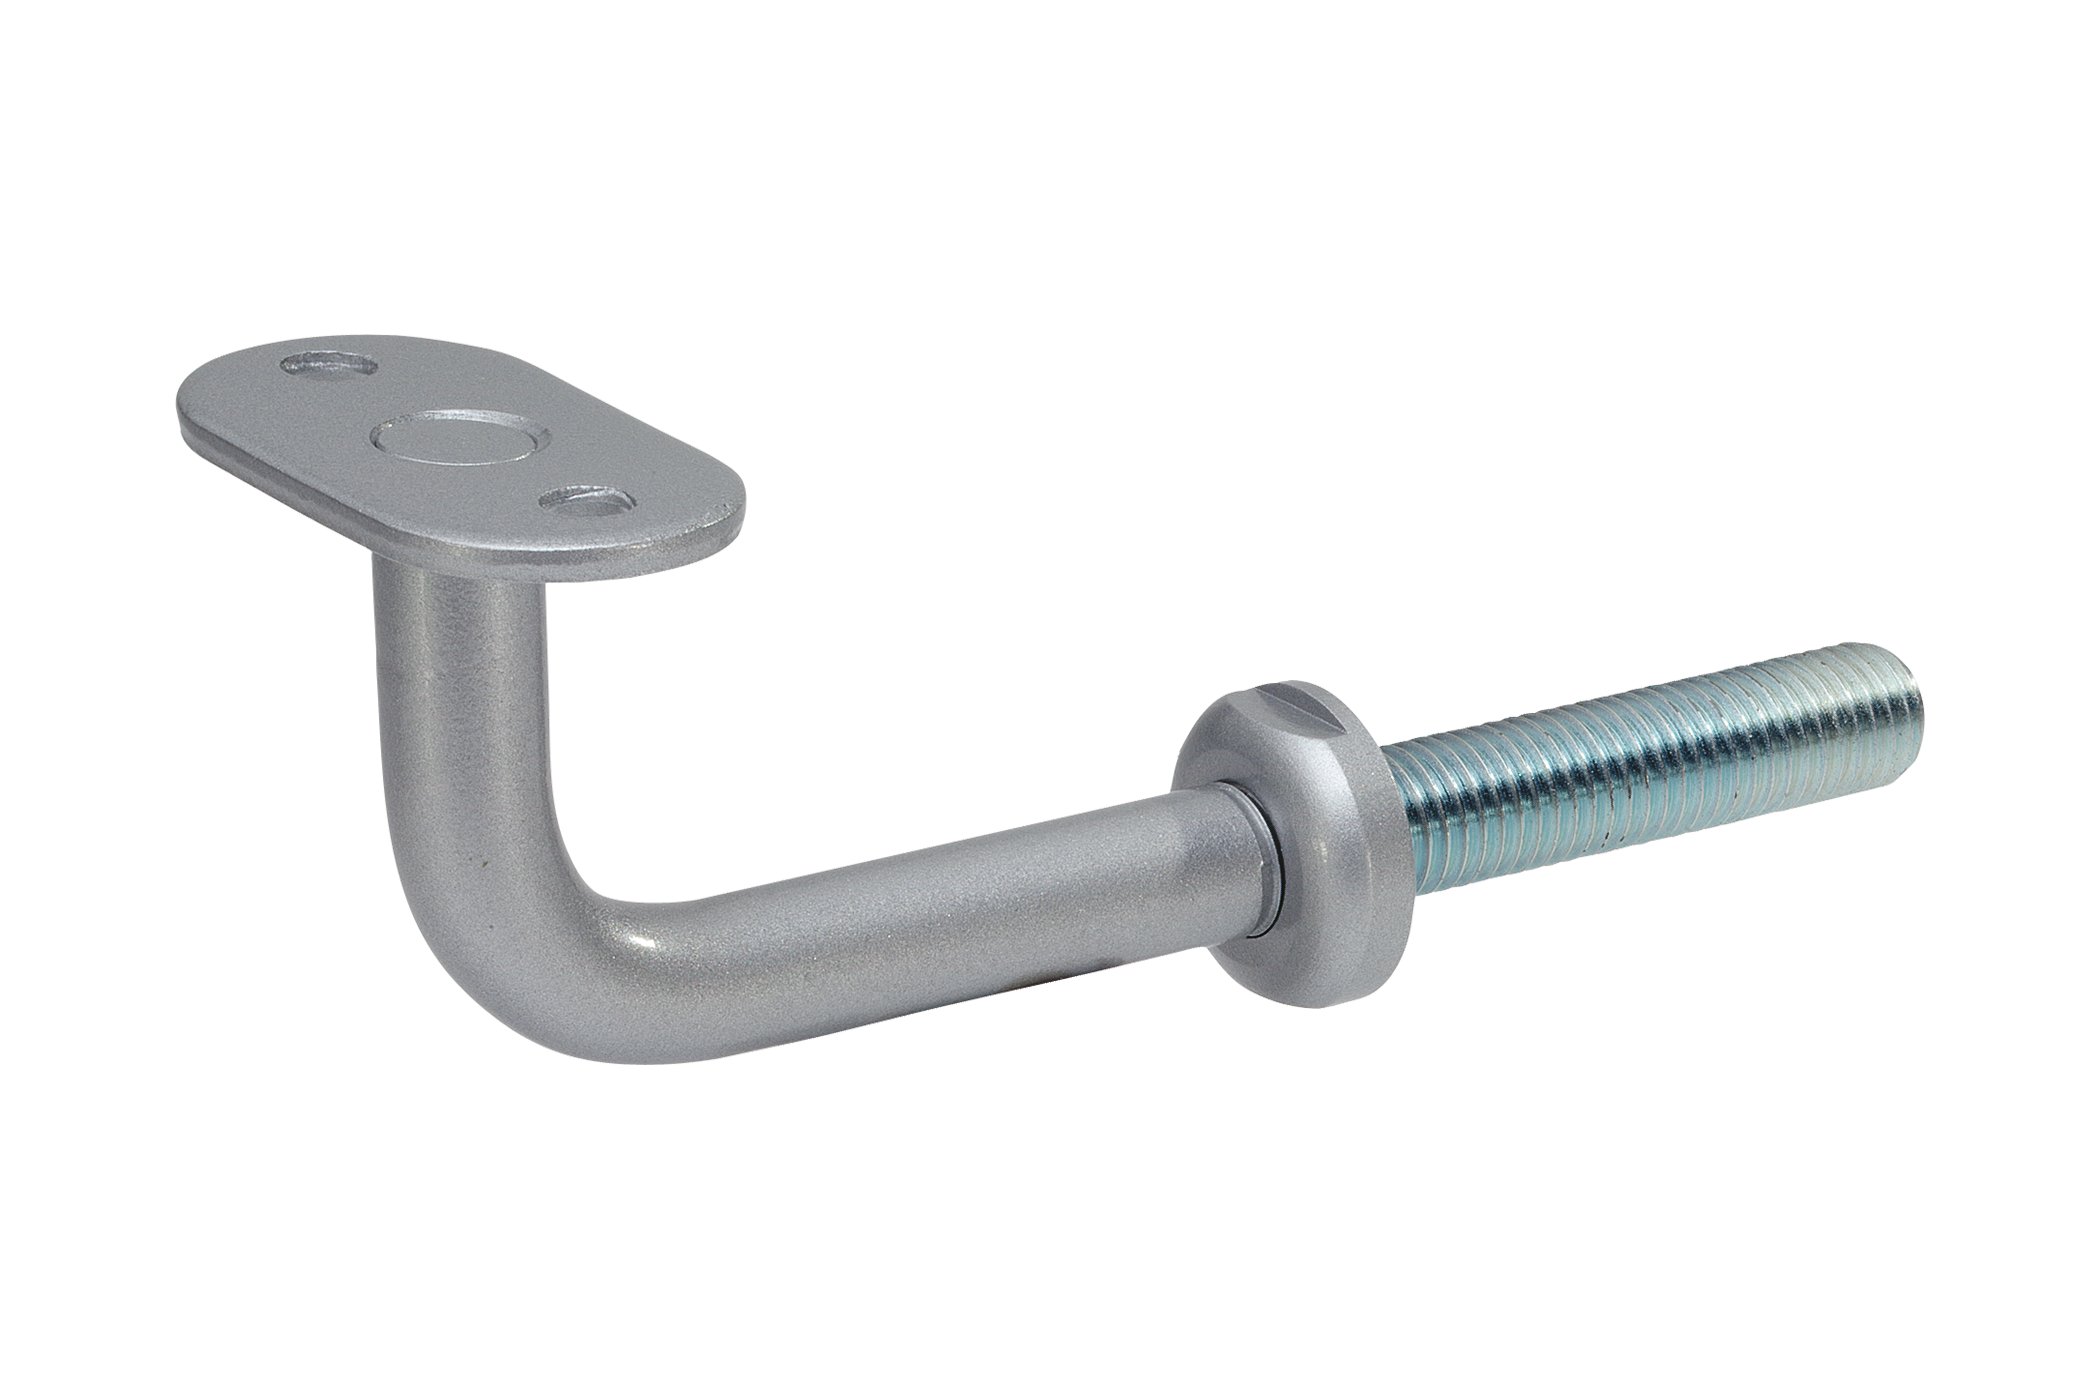 KWS Handrail support 4529 in finish 02 (steel, silver stove-enamelled)